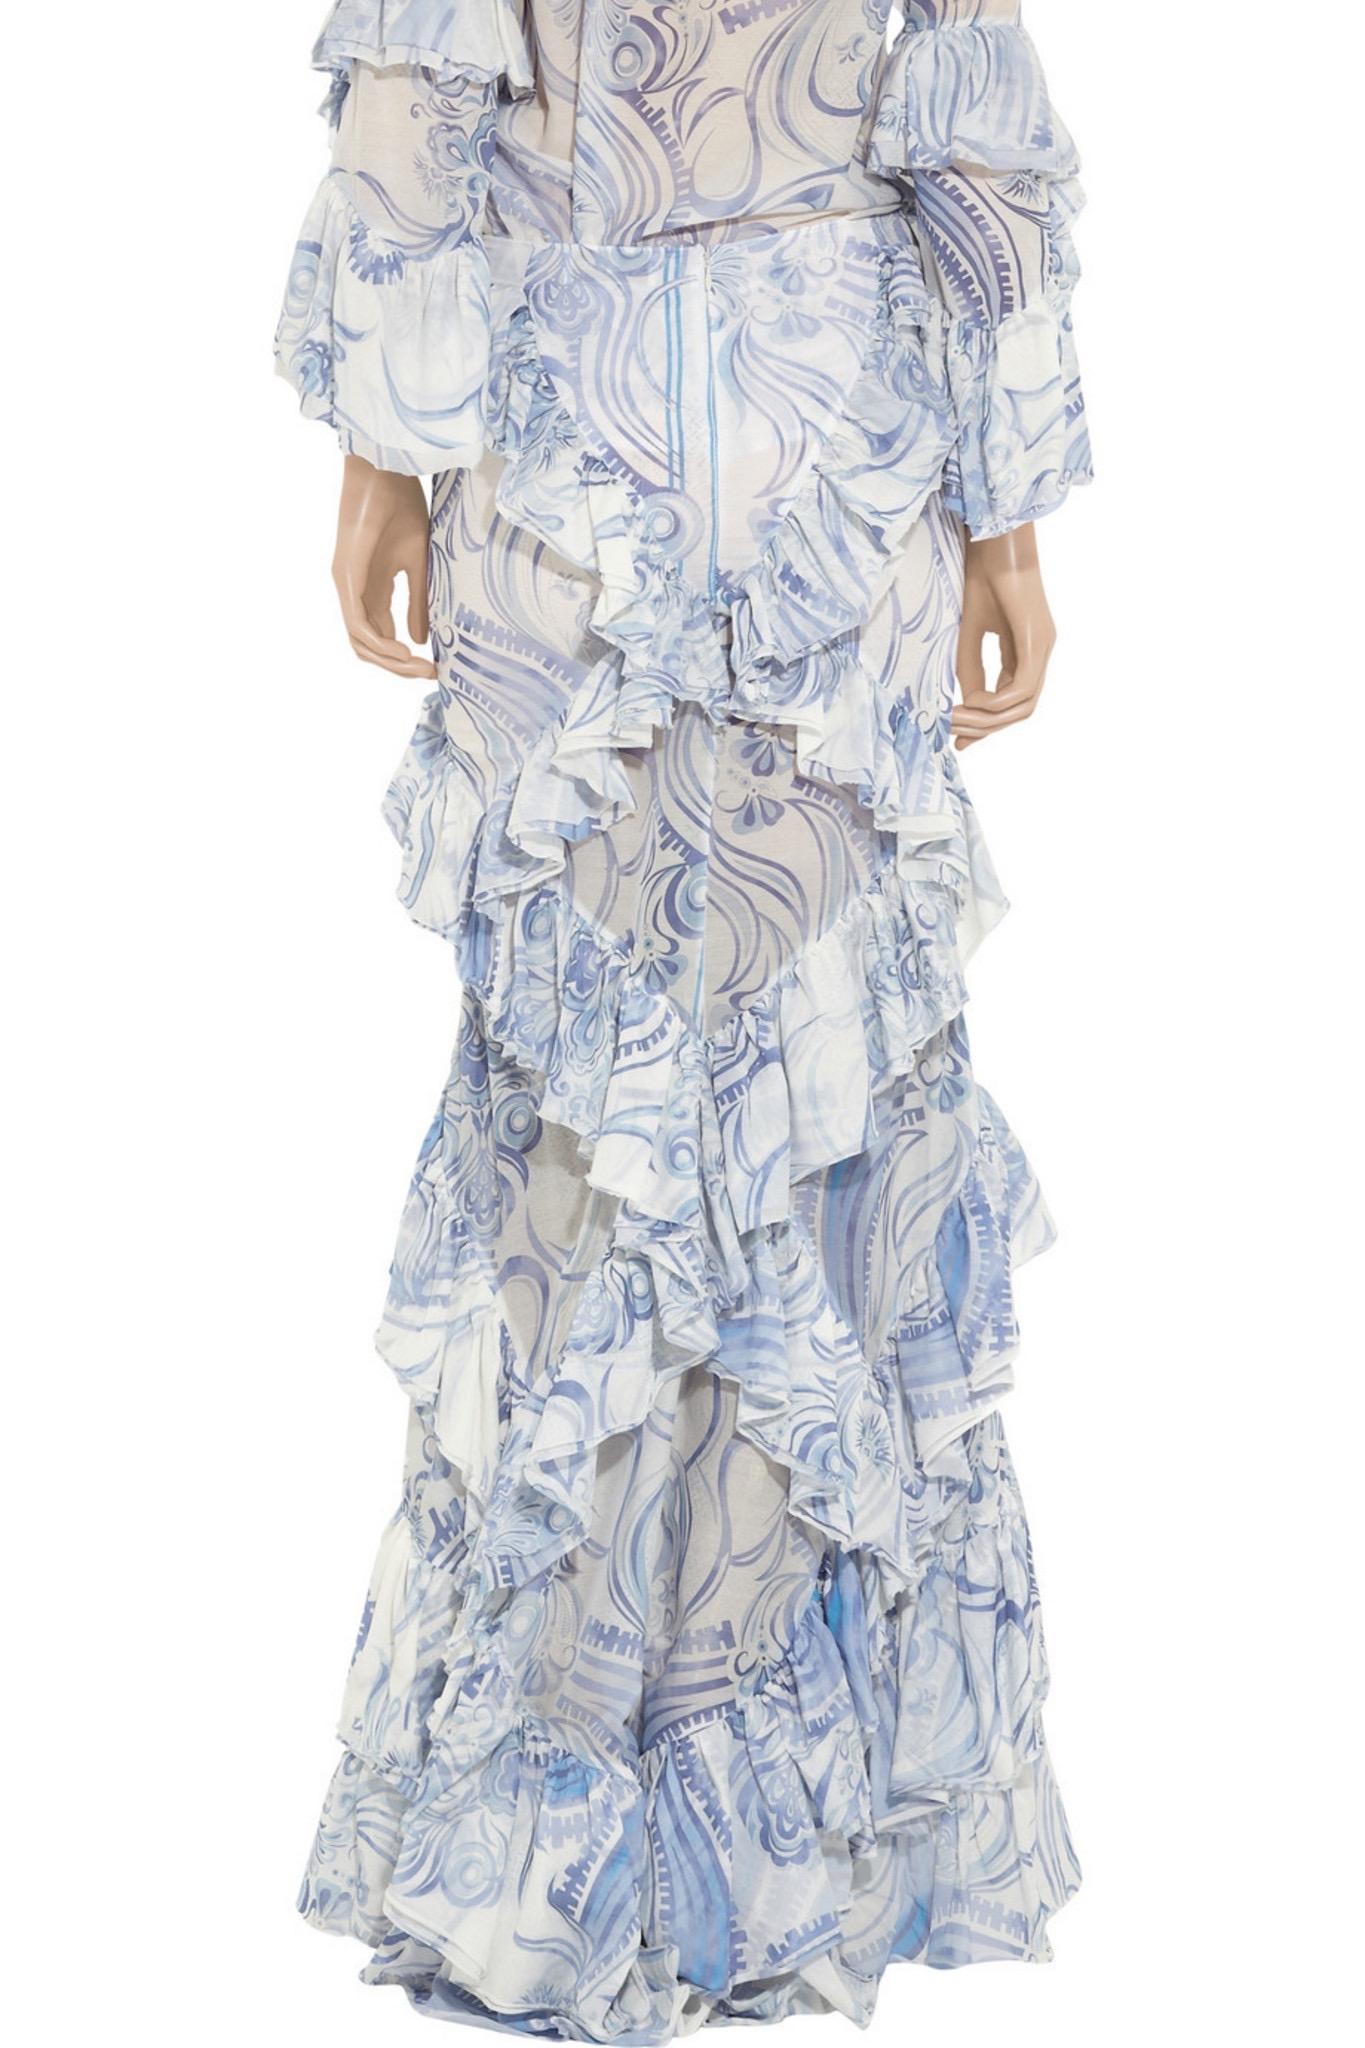 Gray Rare Emilio Pucci by Peter Dundas Signature Print Lace Up Ruffled Maxi Skirt 38 For Sale